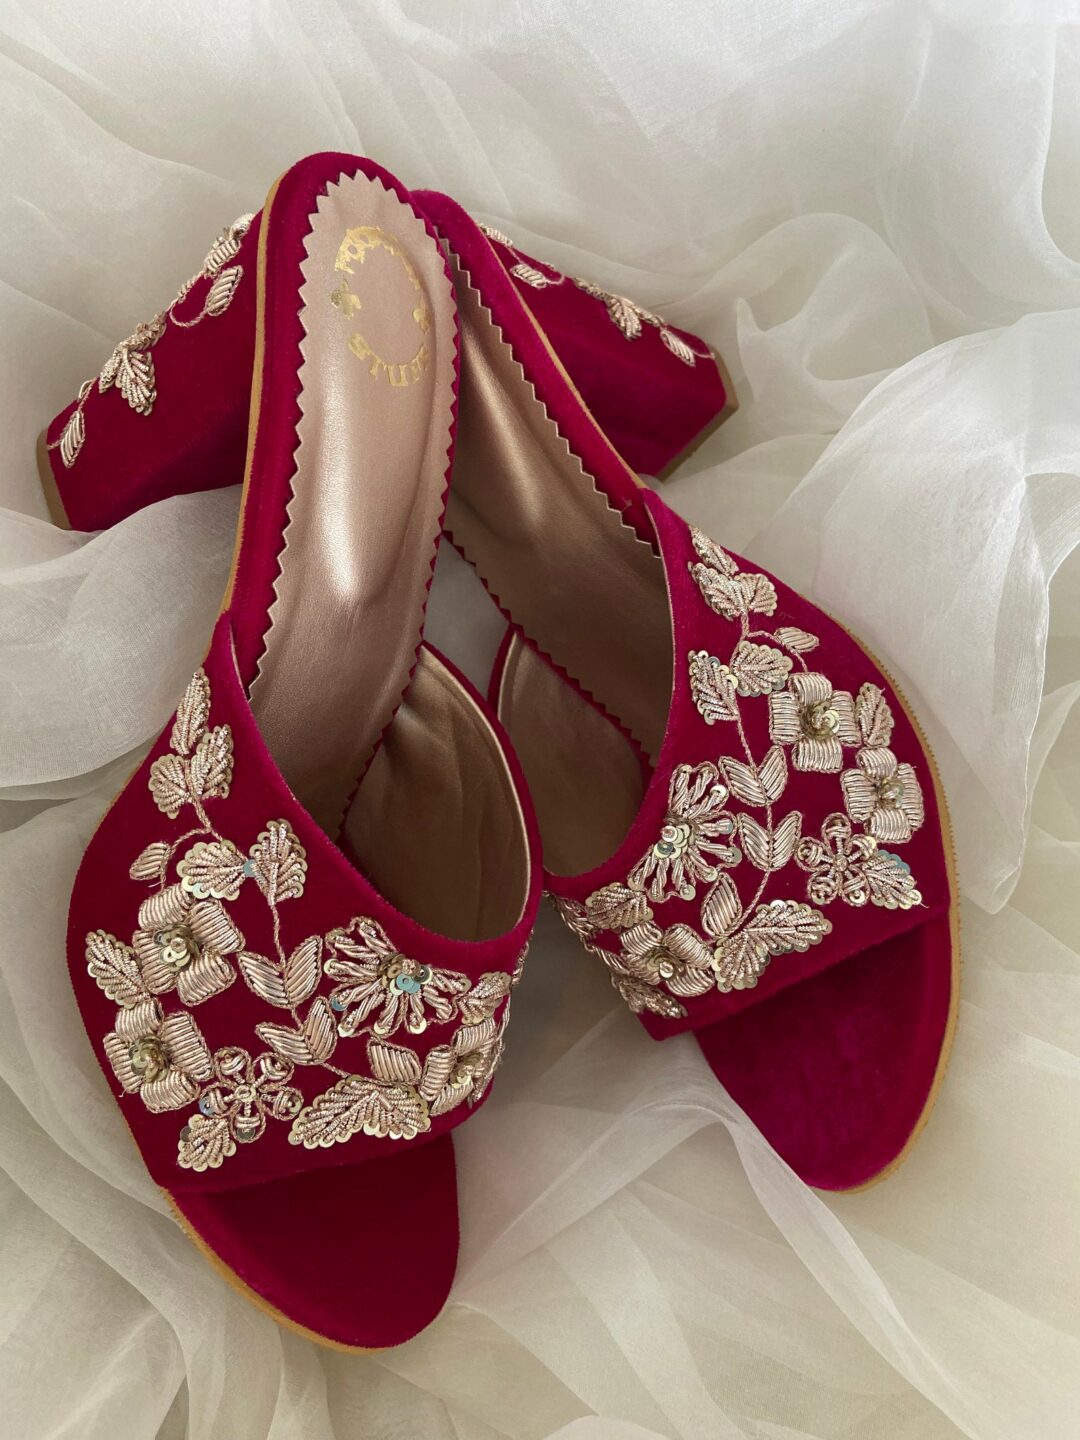 Kviksølv cylinder Pakistan 20 pairs of red wedding shoes [UPDATED for 2022!] • Offbeat Wed (was  Offbeat Bride)